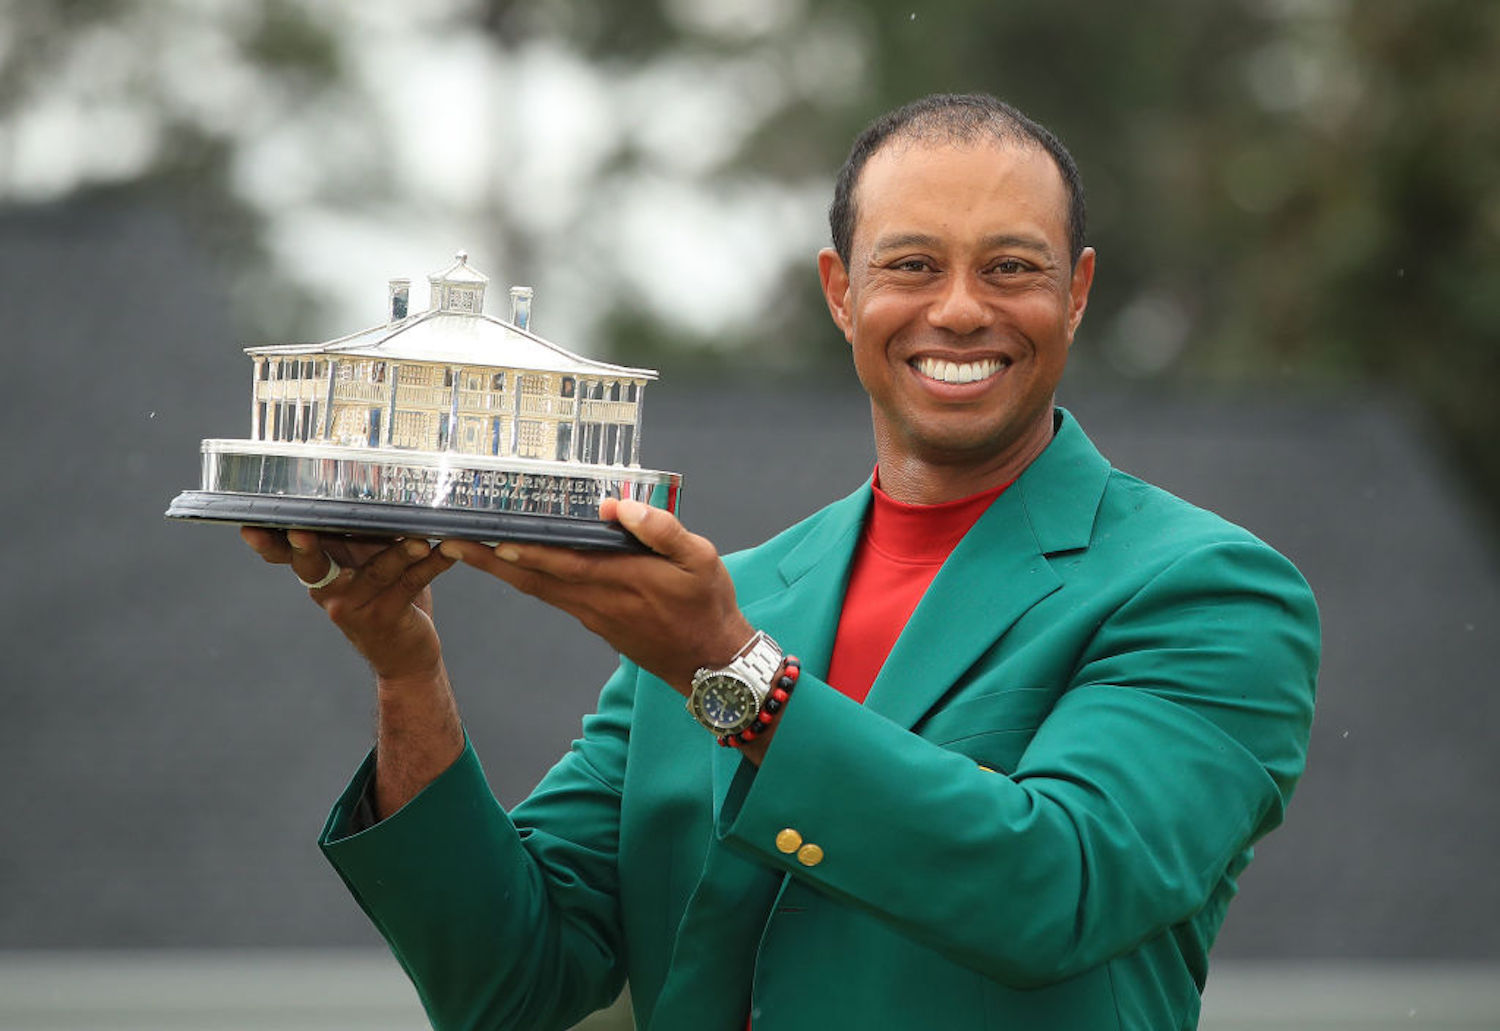 Tiger Woods may be the greatest golfer of all time, but he doesn't hold the record for most major wins. So, who does?